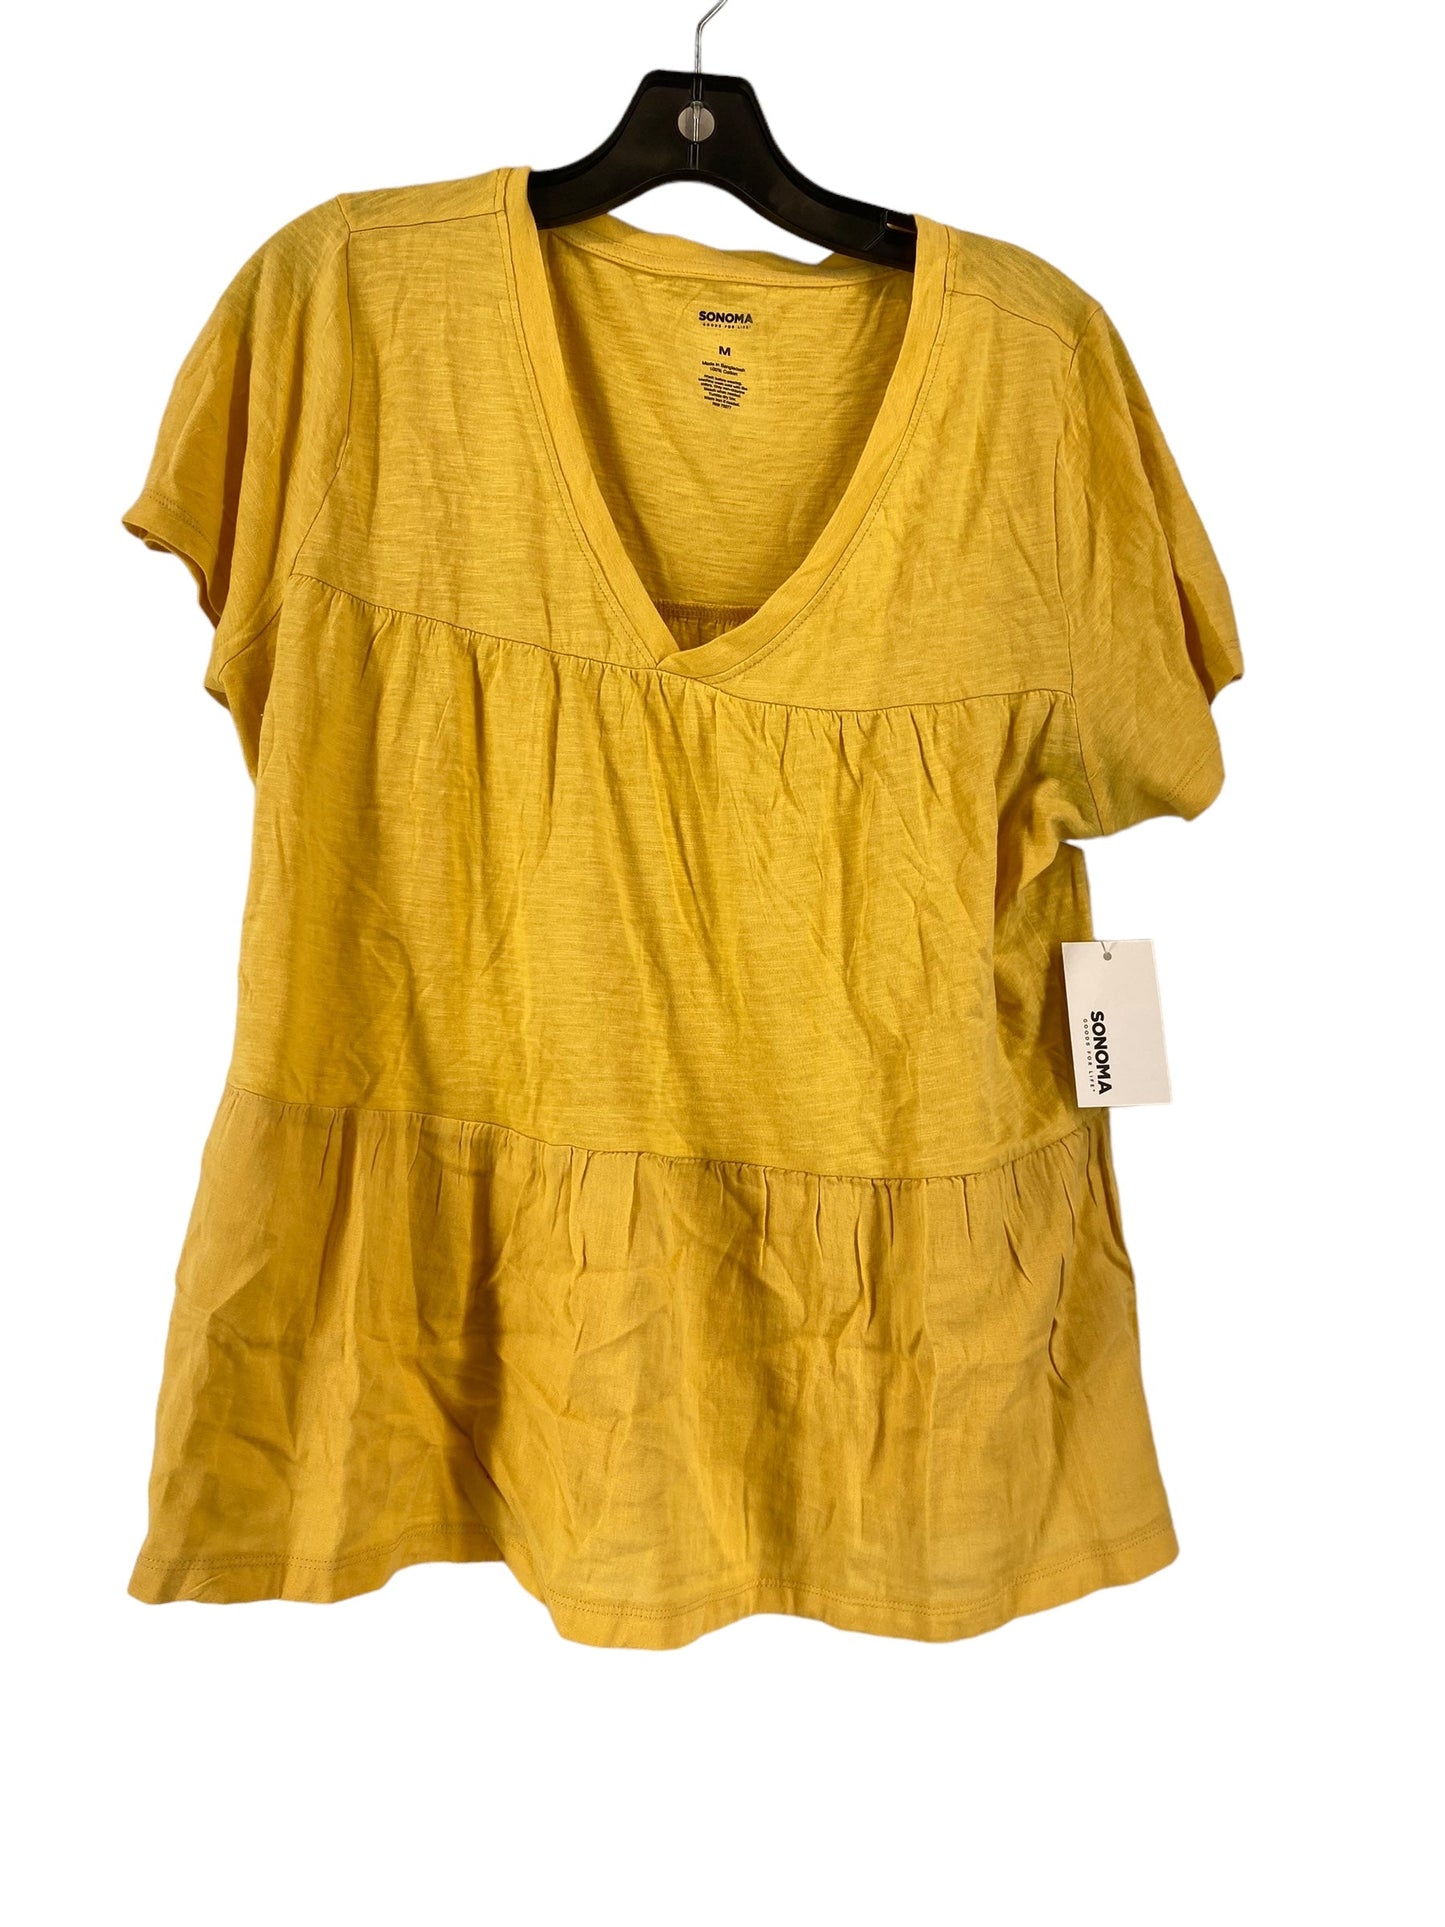 Yellow Top Short Sleeve Sonoma, Size M